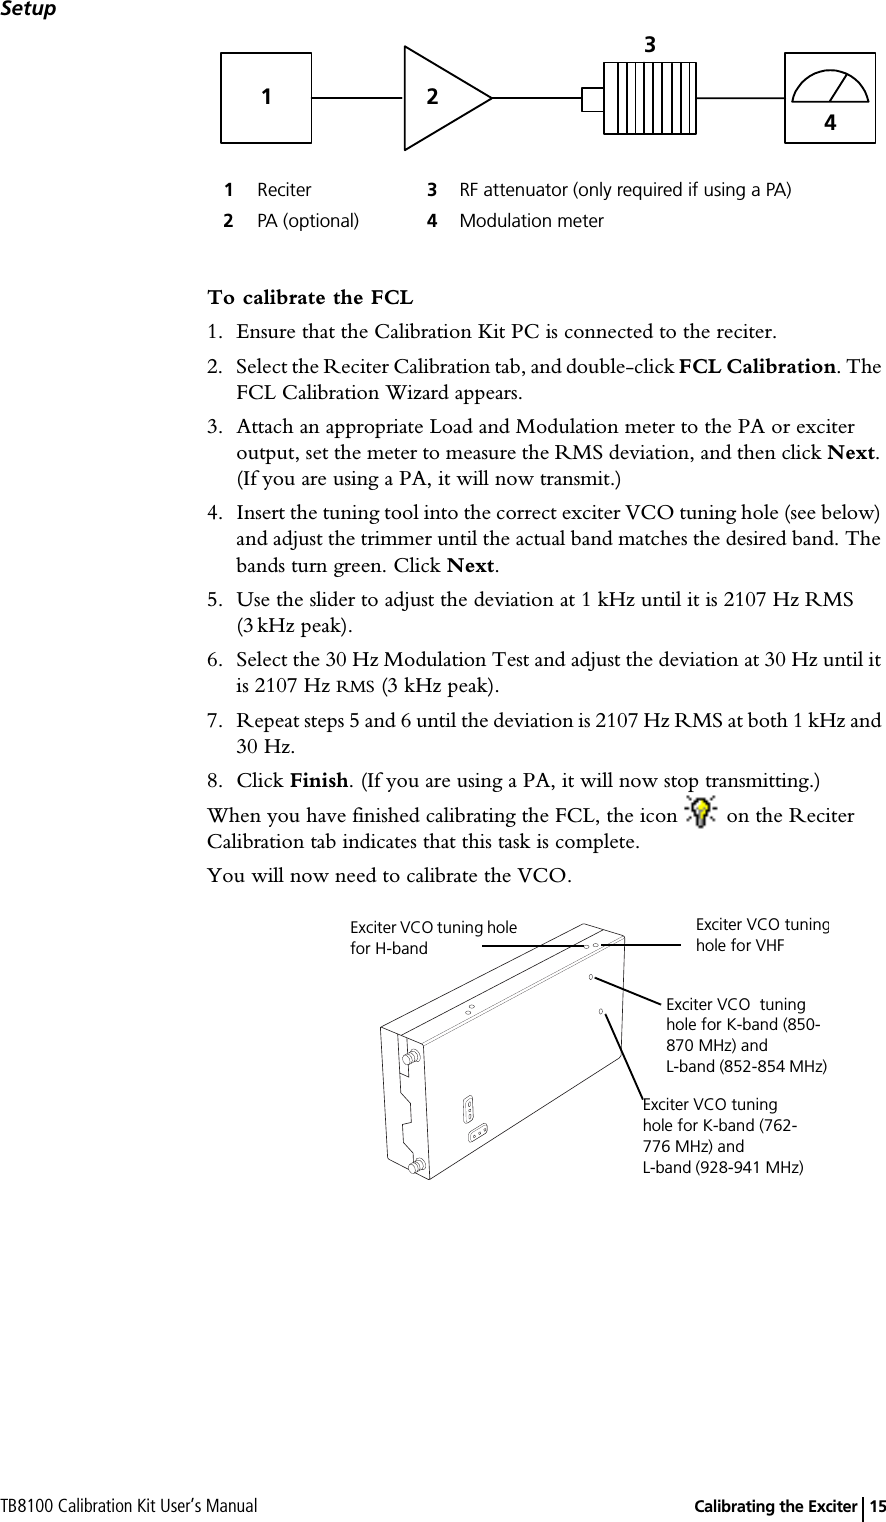 TB8100 Calibration Kit User’s Manual   Calibrating the Exciter 15SetupTo calibrate the FCL1. Ensure that the Calibration Kit PC is connected to the reciter.2. Select the Reciter Calibration tab, and double-click FCL Calibration. The FCL Calibration Wizard appears.3. Attach an appropriate Load and Modulation meter to the PA or exciter output, set the meter to measure the RMS deviation, and then click Next. (If you are using a PA, it will now transmit.)4. Insert the tuning tool into the correct exciter VCO tuning hole (see below) and adjust the trimmer until the actual band matches the desired band. The bands turn green. Click Next.5. Use the slider to adjust the deviation at 1 kHz until it is 2107 Hz RMS (3 kHz peak).6. Select the 30 Hz Modulation Test and adjust the deviation at 30 Hz until it is 2107 Hz RMS (3 kHz peak).7. Repeat steps 5 and 6 until the deviation is 2107 Hz RMS at both 1 kHz and 30 Hz.8. Click Finish. (If you are using a PA, it will now stop transmitting.)When you have finished calibrating the FCL, the icon   on the Reciter Calibration tab indicates that this task is complete.You will now need to calibrate the VCO.1Reciter 3RF attenuator (only required if using a PA)2PA (optional) 4Modulation meter1234Exciter VCO tuning hole for H-band  Exciter VCO tuninghole for VHFExciter VCO  tuning hole for K-band (850-870 MHz) and L-band (852-854 MHz)Exciter VCO tuning hole for K-band (762-776 MHz) andL-band (928-941 MHz)